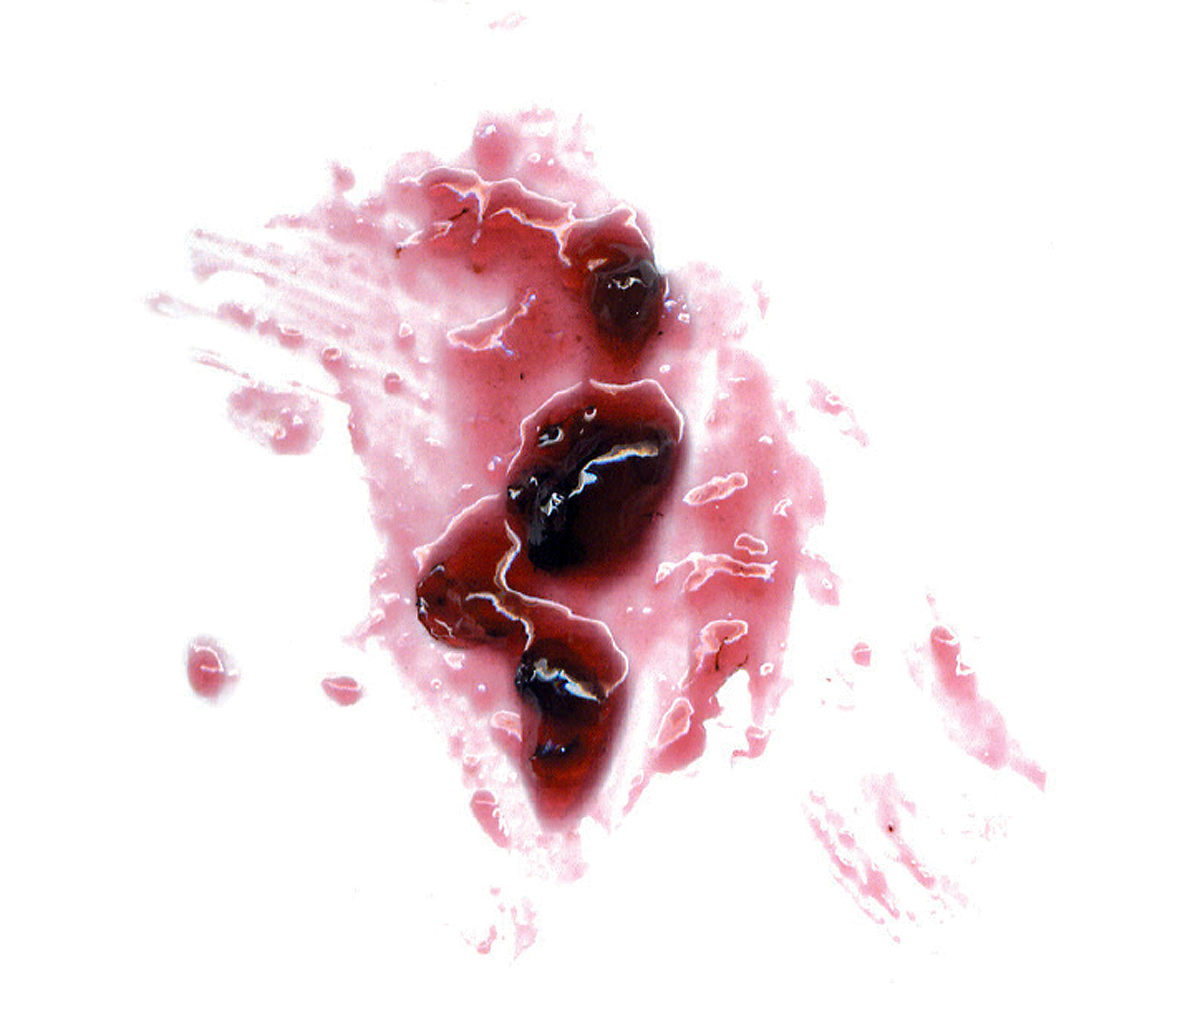 A photograph of a stain made by crushed Rubus armeniacus.